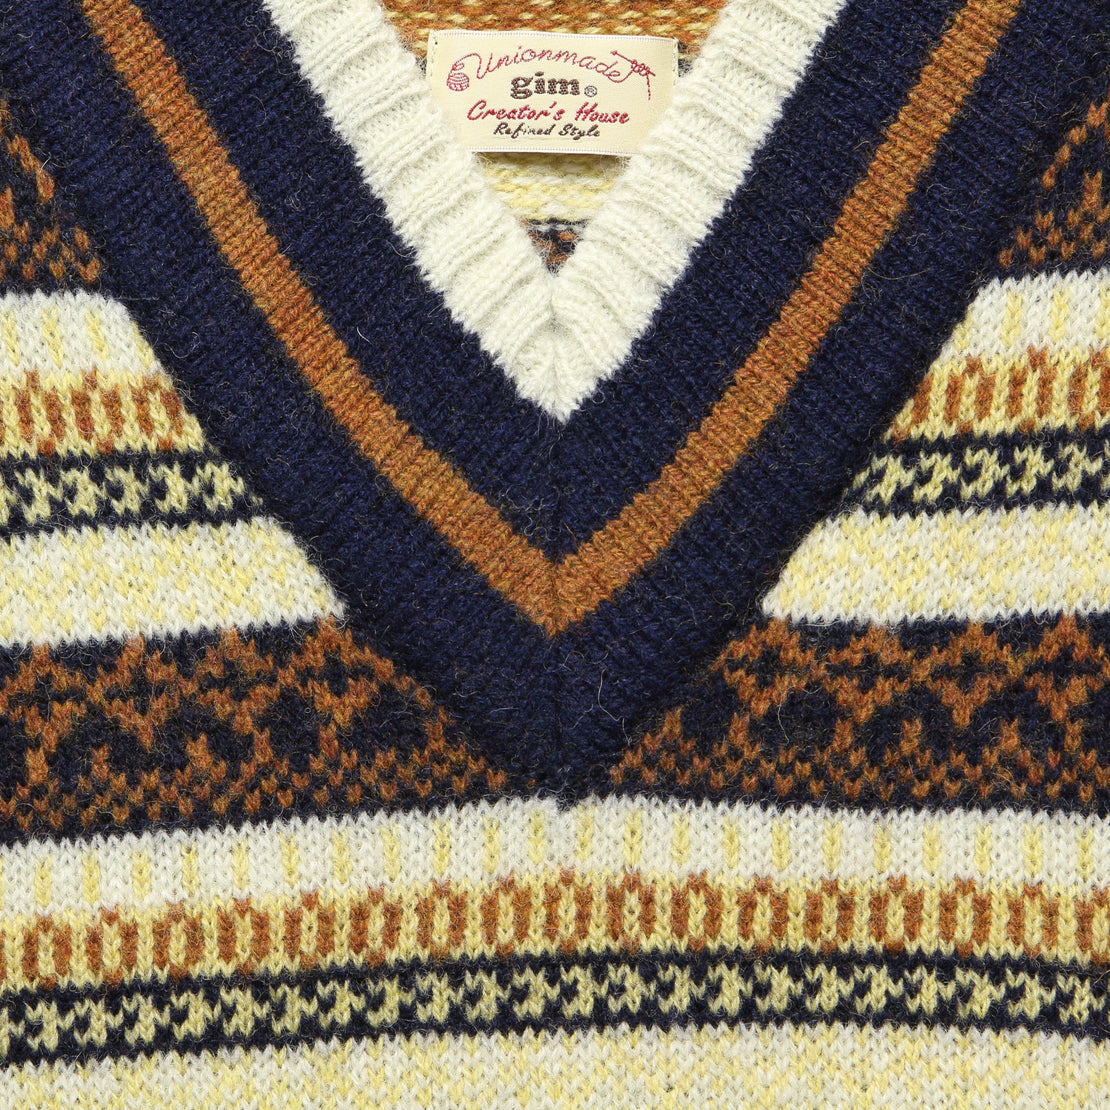 Cricket Sweater Vest - Cream Fair Isle - BEAMS+ - STAG Provisions - Tops - Sweater